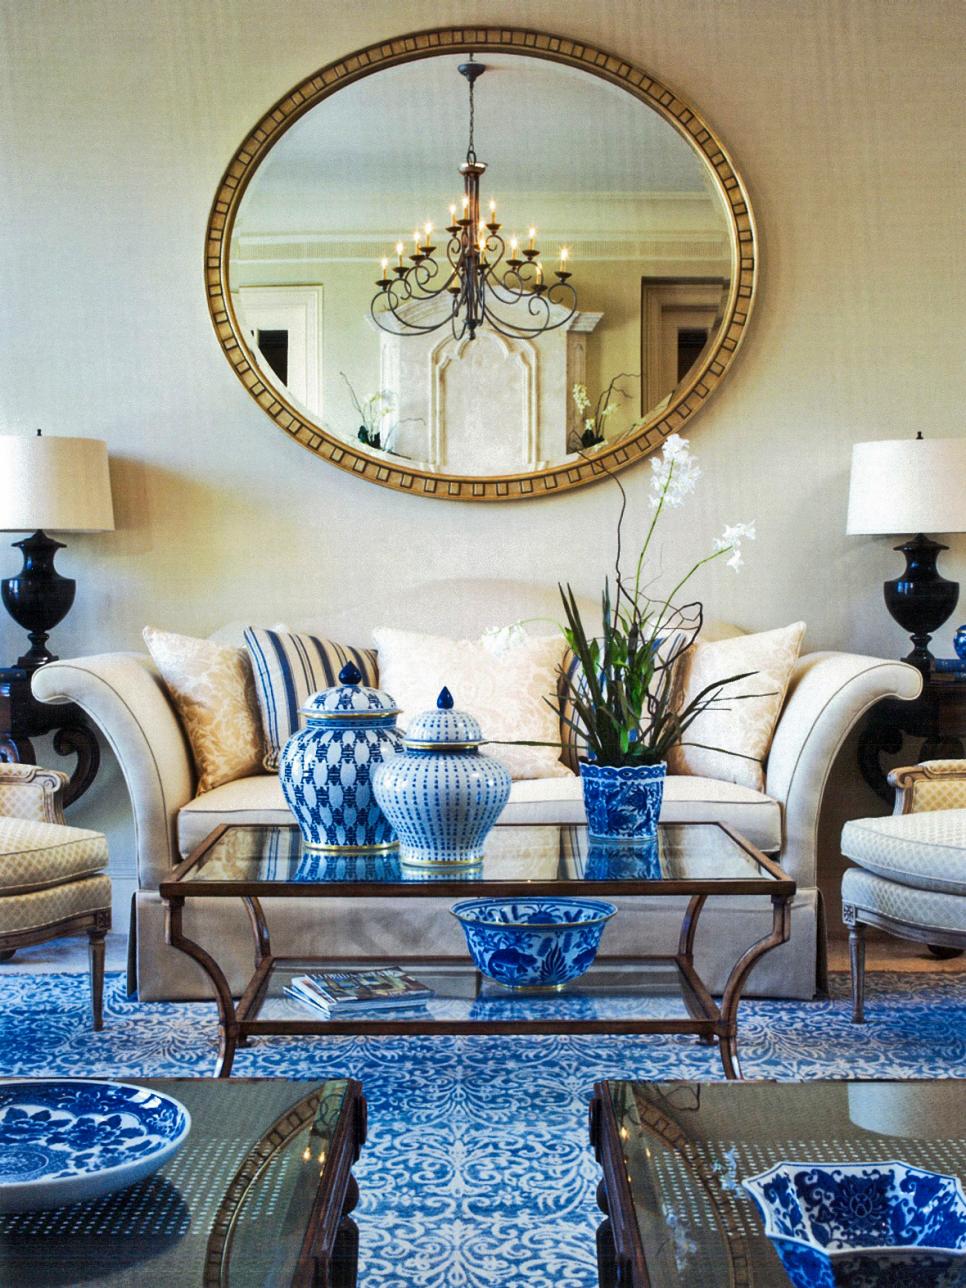 Blue Living Room With Large Round Mirror HGTV